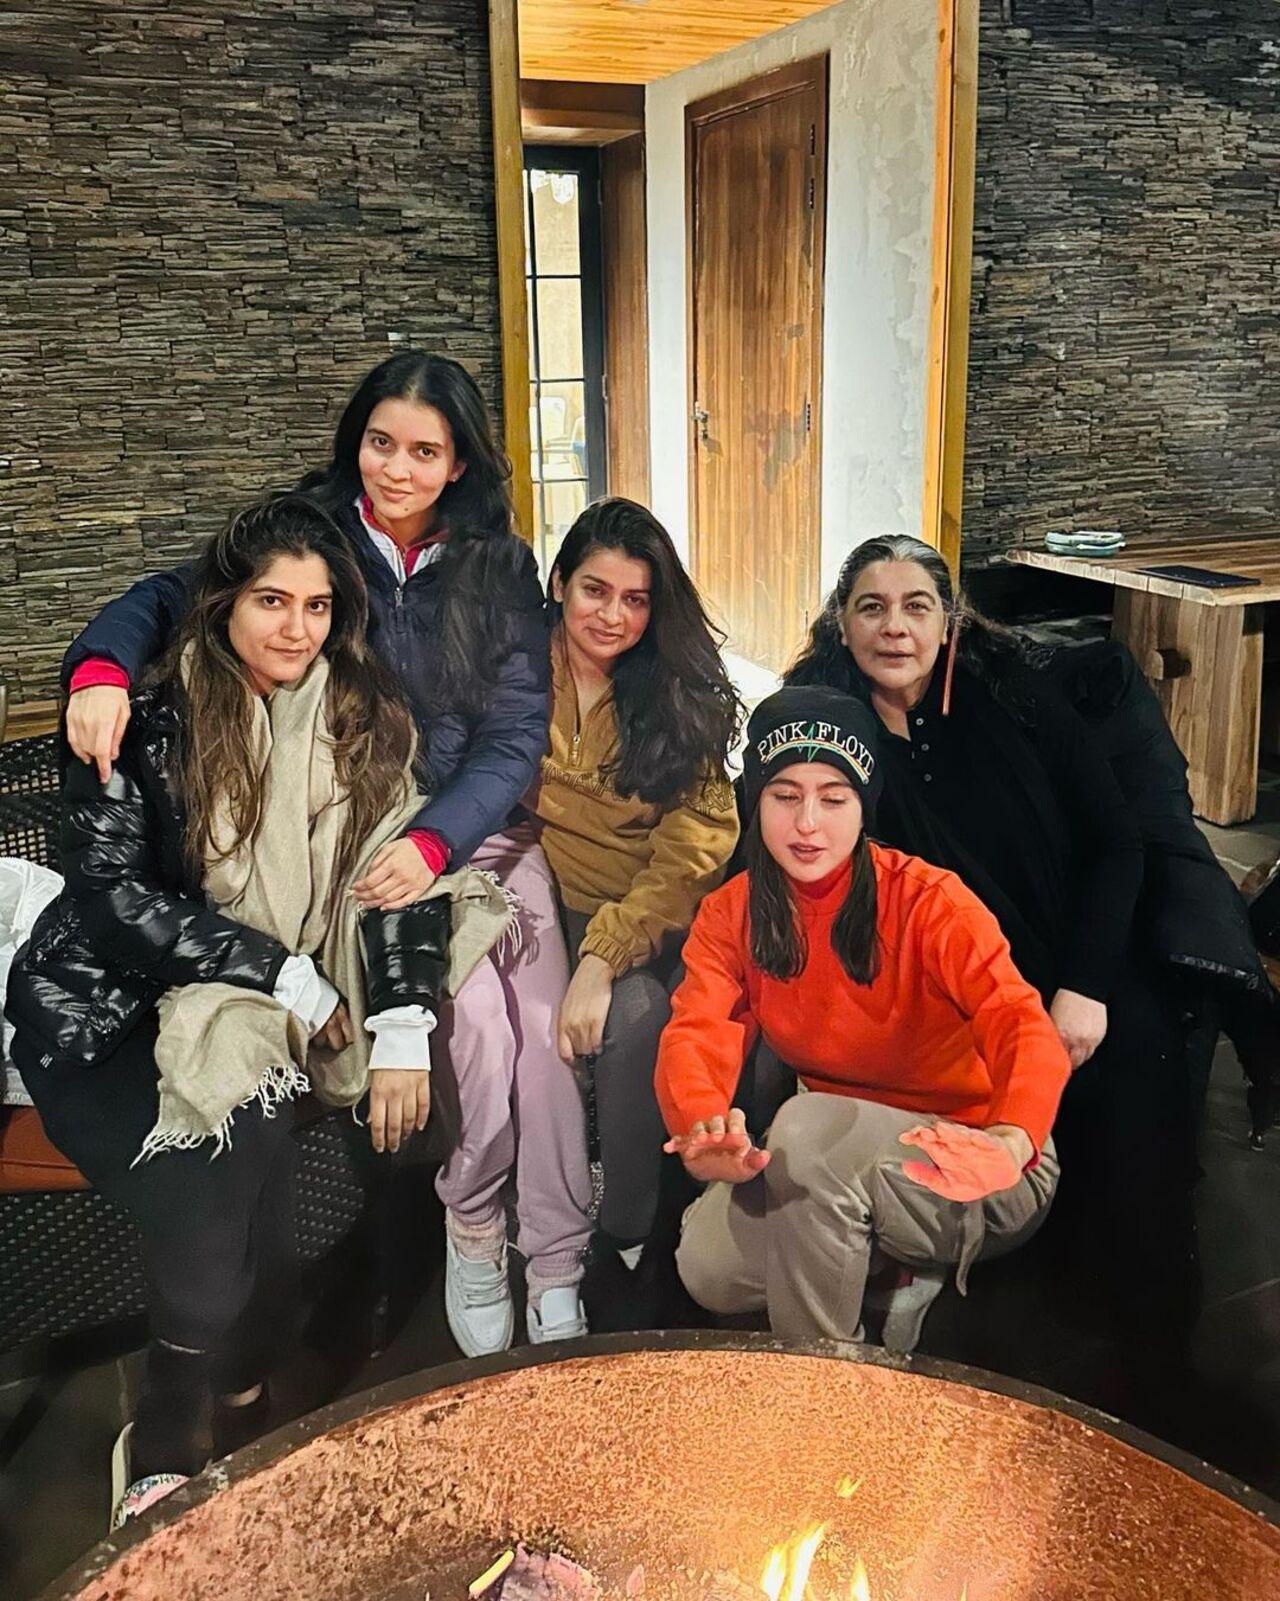 Being the cool mother, Amrita Singh blends in with Sara and her friends during a trip up North